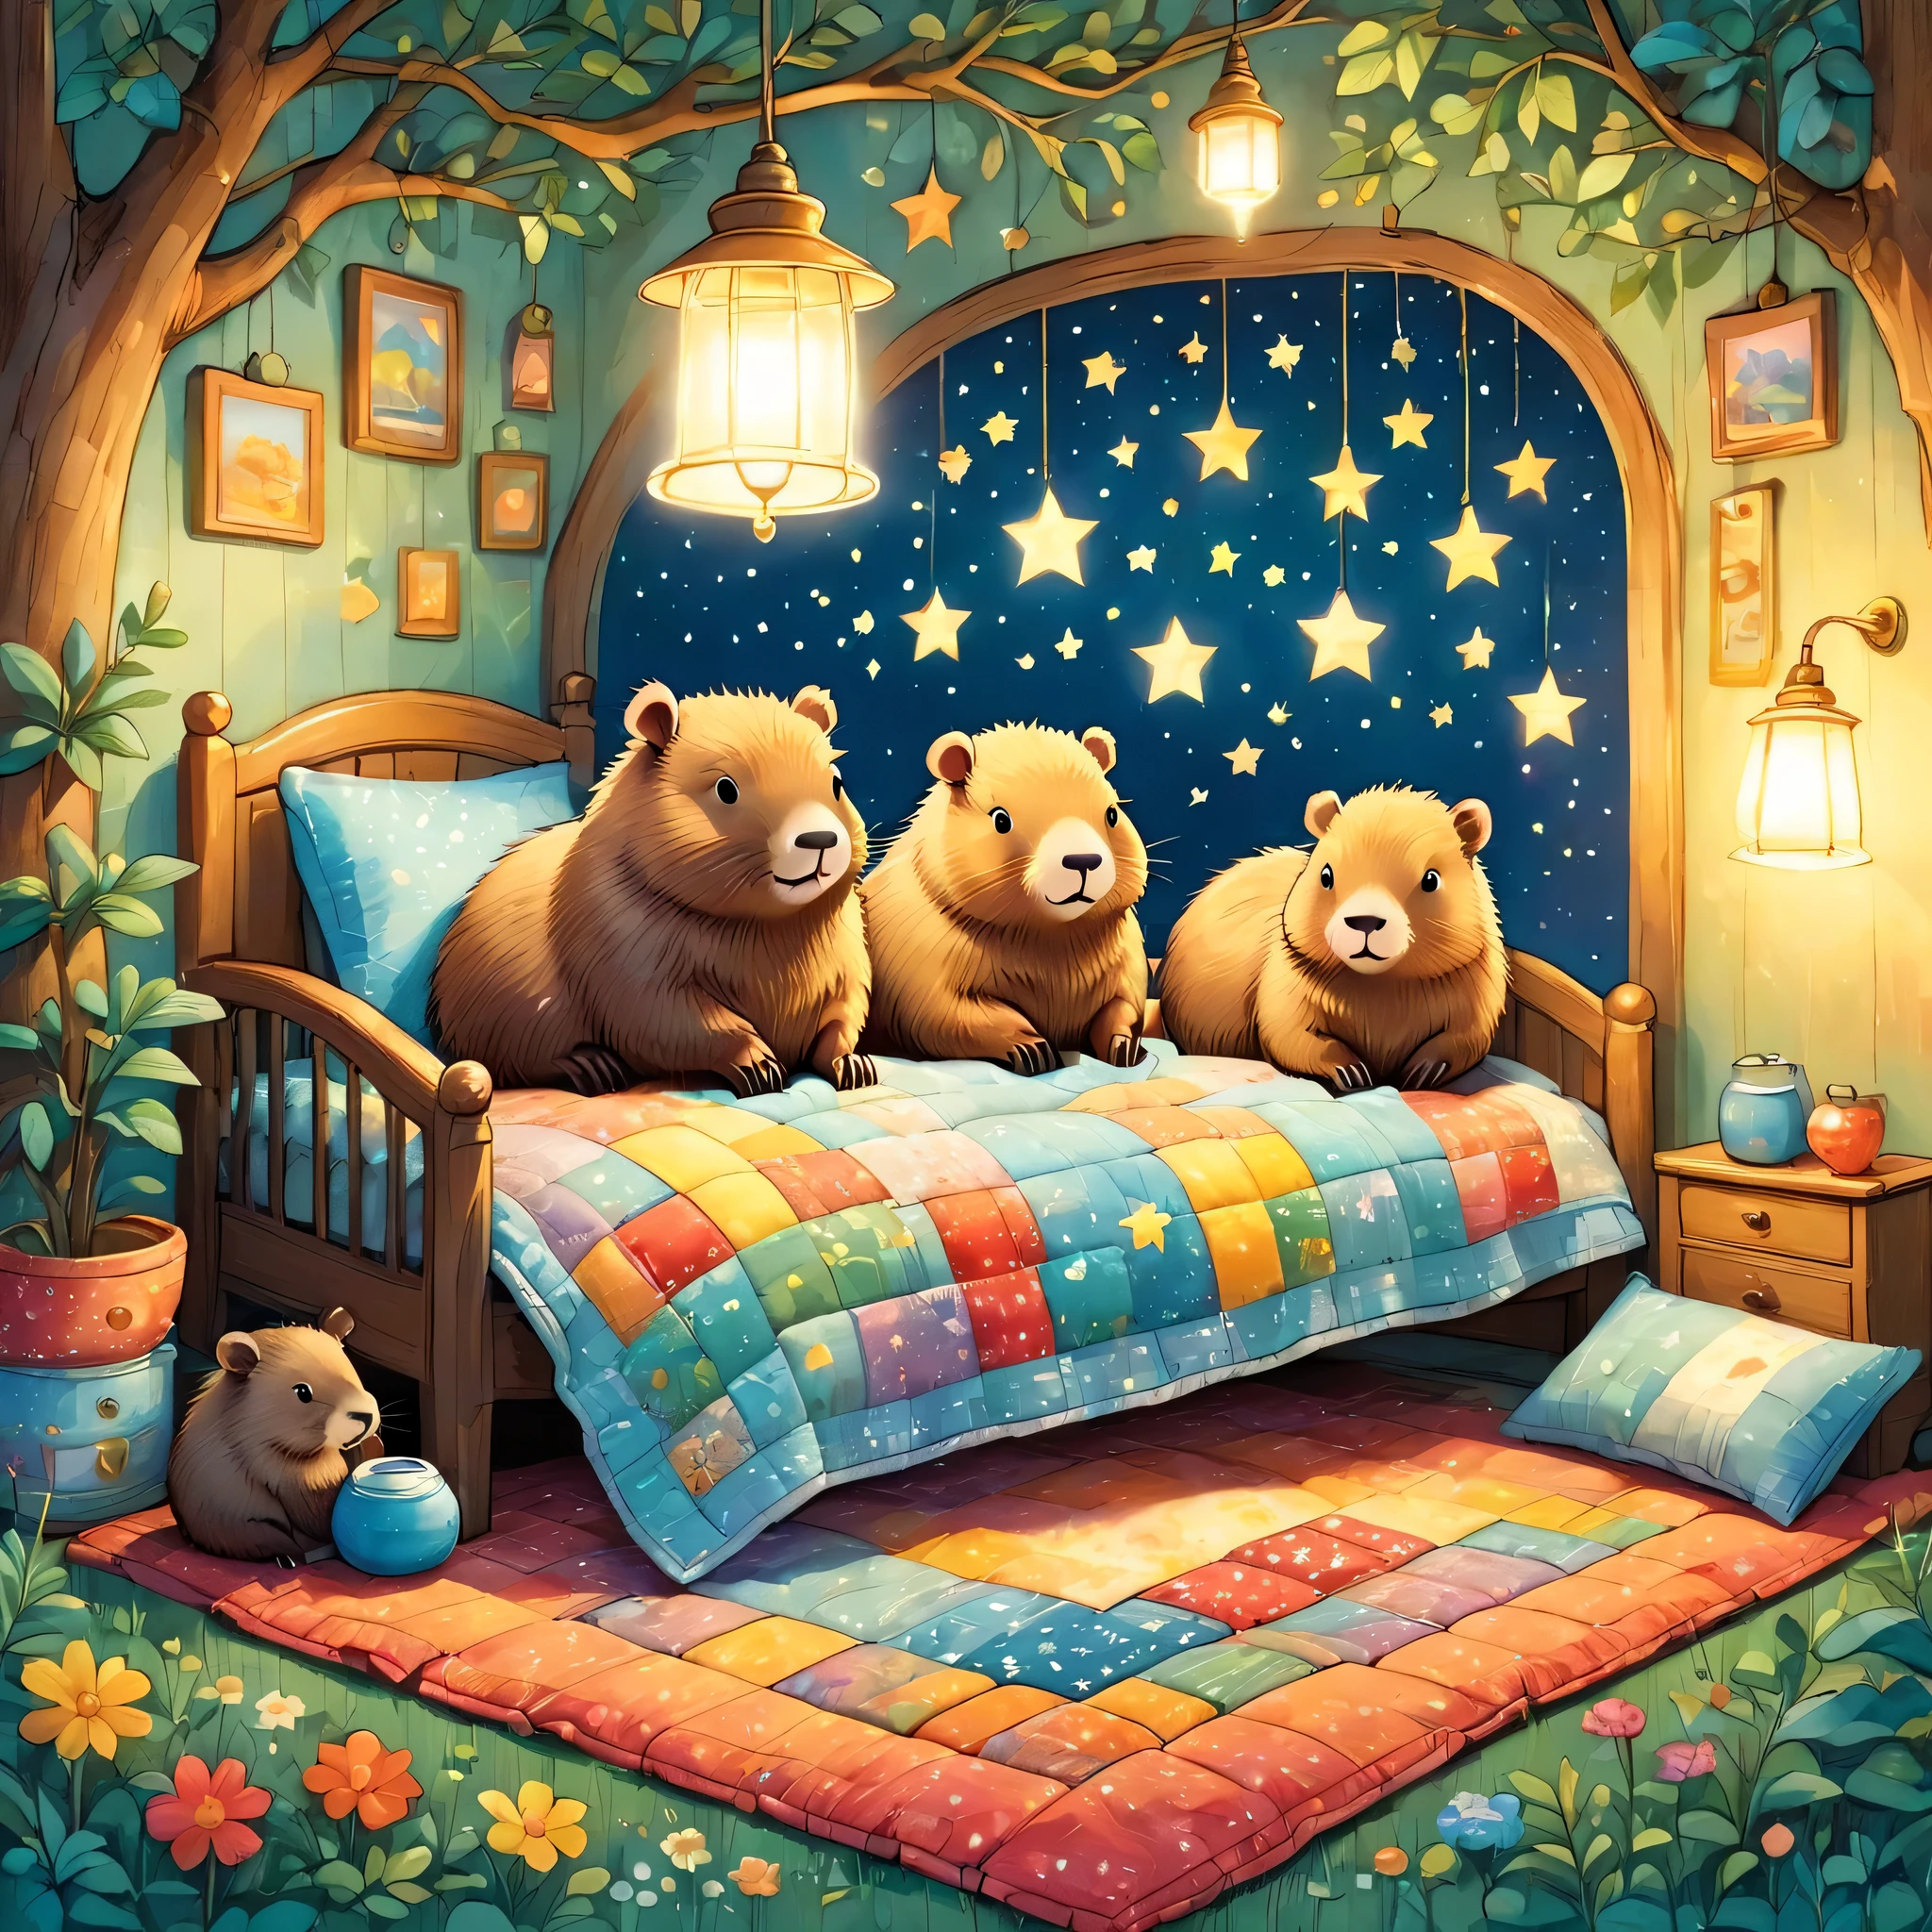 cuteAn illustrationカピバラの家,Capybara family:animal:hibernating:cute:Nestle:sleep:comfortable and warm:looks happy,An illustration,pop,colorful,draw with thick lines,color,dim,Lamp light,The hibernating Capybara family is asleep.:dream happy dreams,The house is warm and full of happiness,,colorful,Fancy,Fantasy,patchwork:quilt,detailed details,fluffy,Randolph Caldecott Style,Rich colors,Cast colorful spells,concentrated,The best configuration,Perfect composition,accent,An illustration that children will enjoy,For kids,feel warm,wonderful like a dream,Happy and fun looking capybaras,Little,Cast colorful spells,Sparkling,Anatomically correct